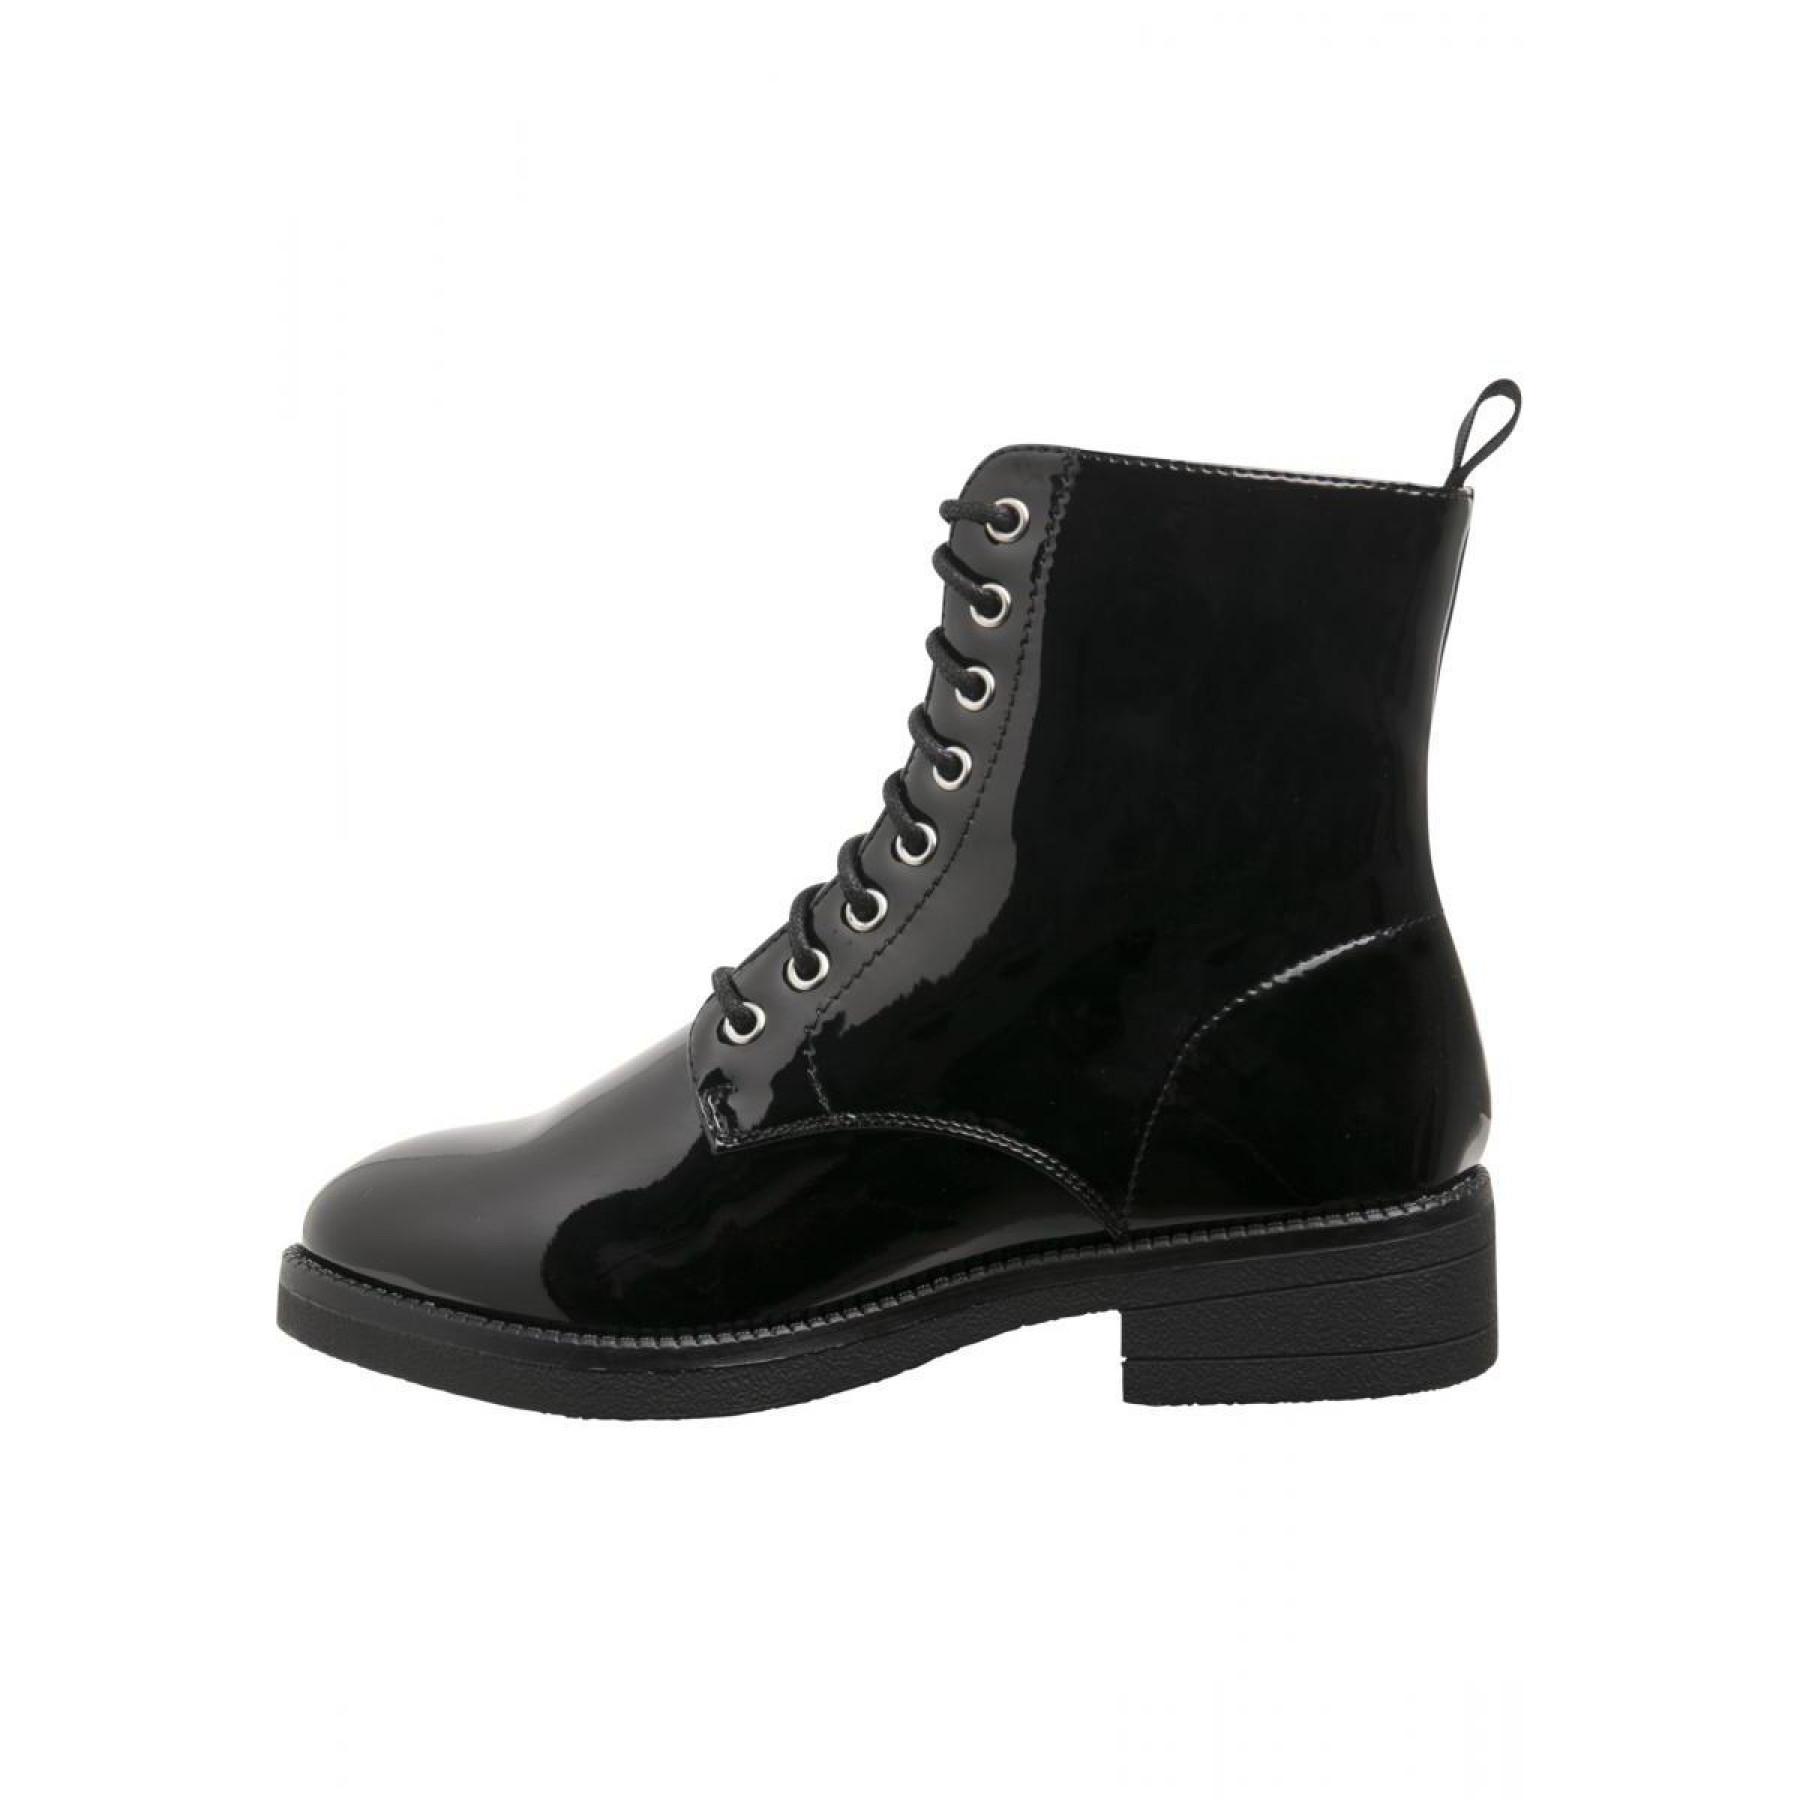 Urban Classic lace boot sneakers